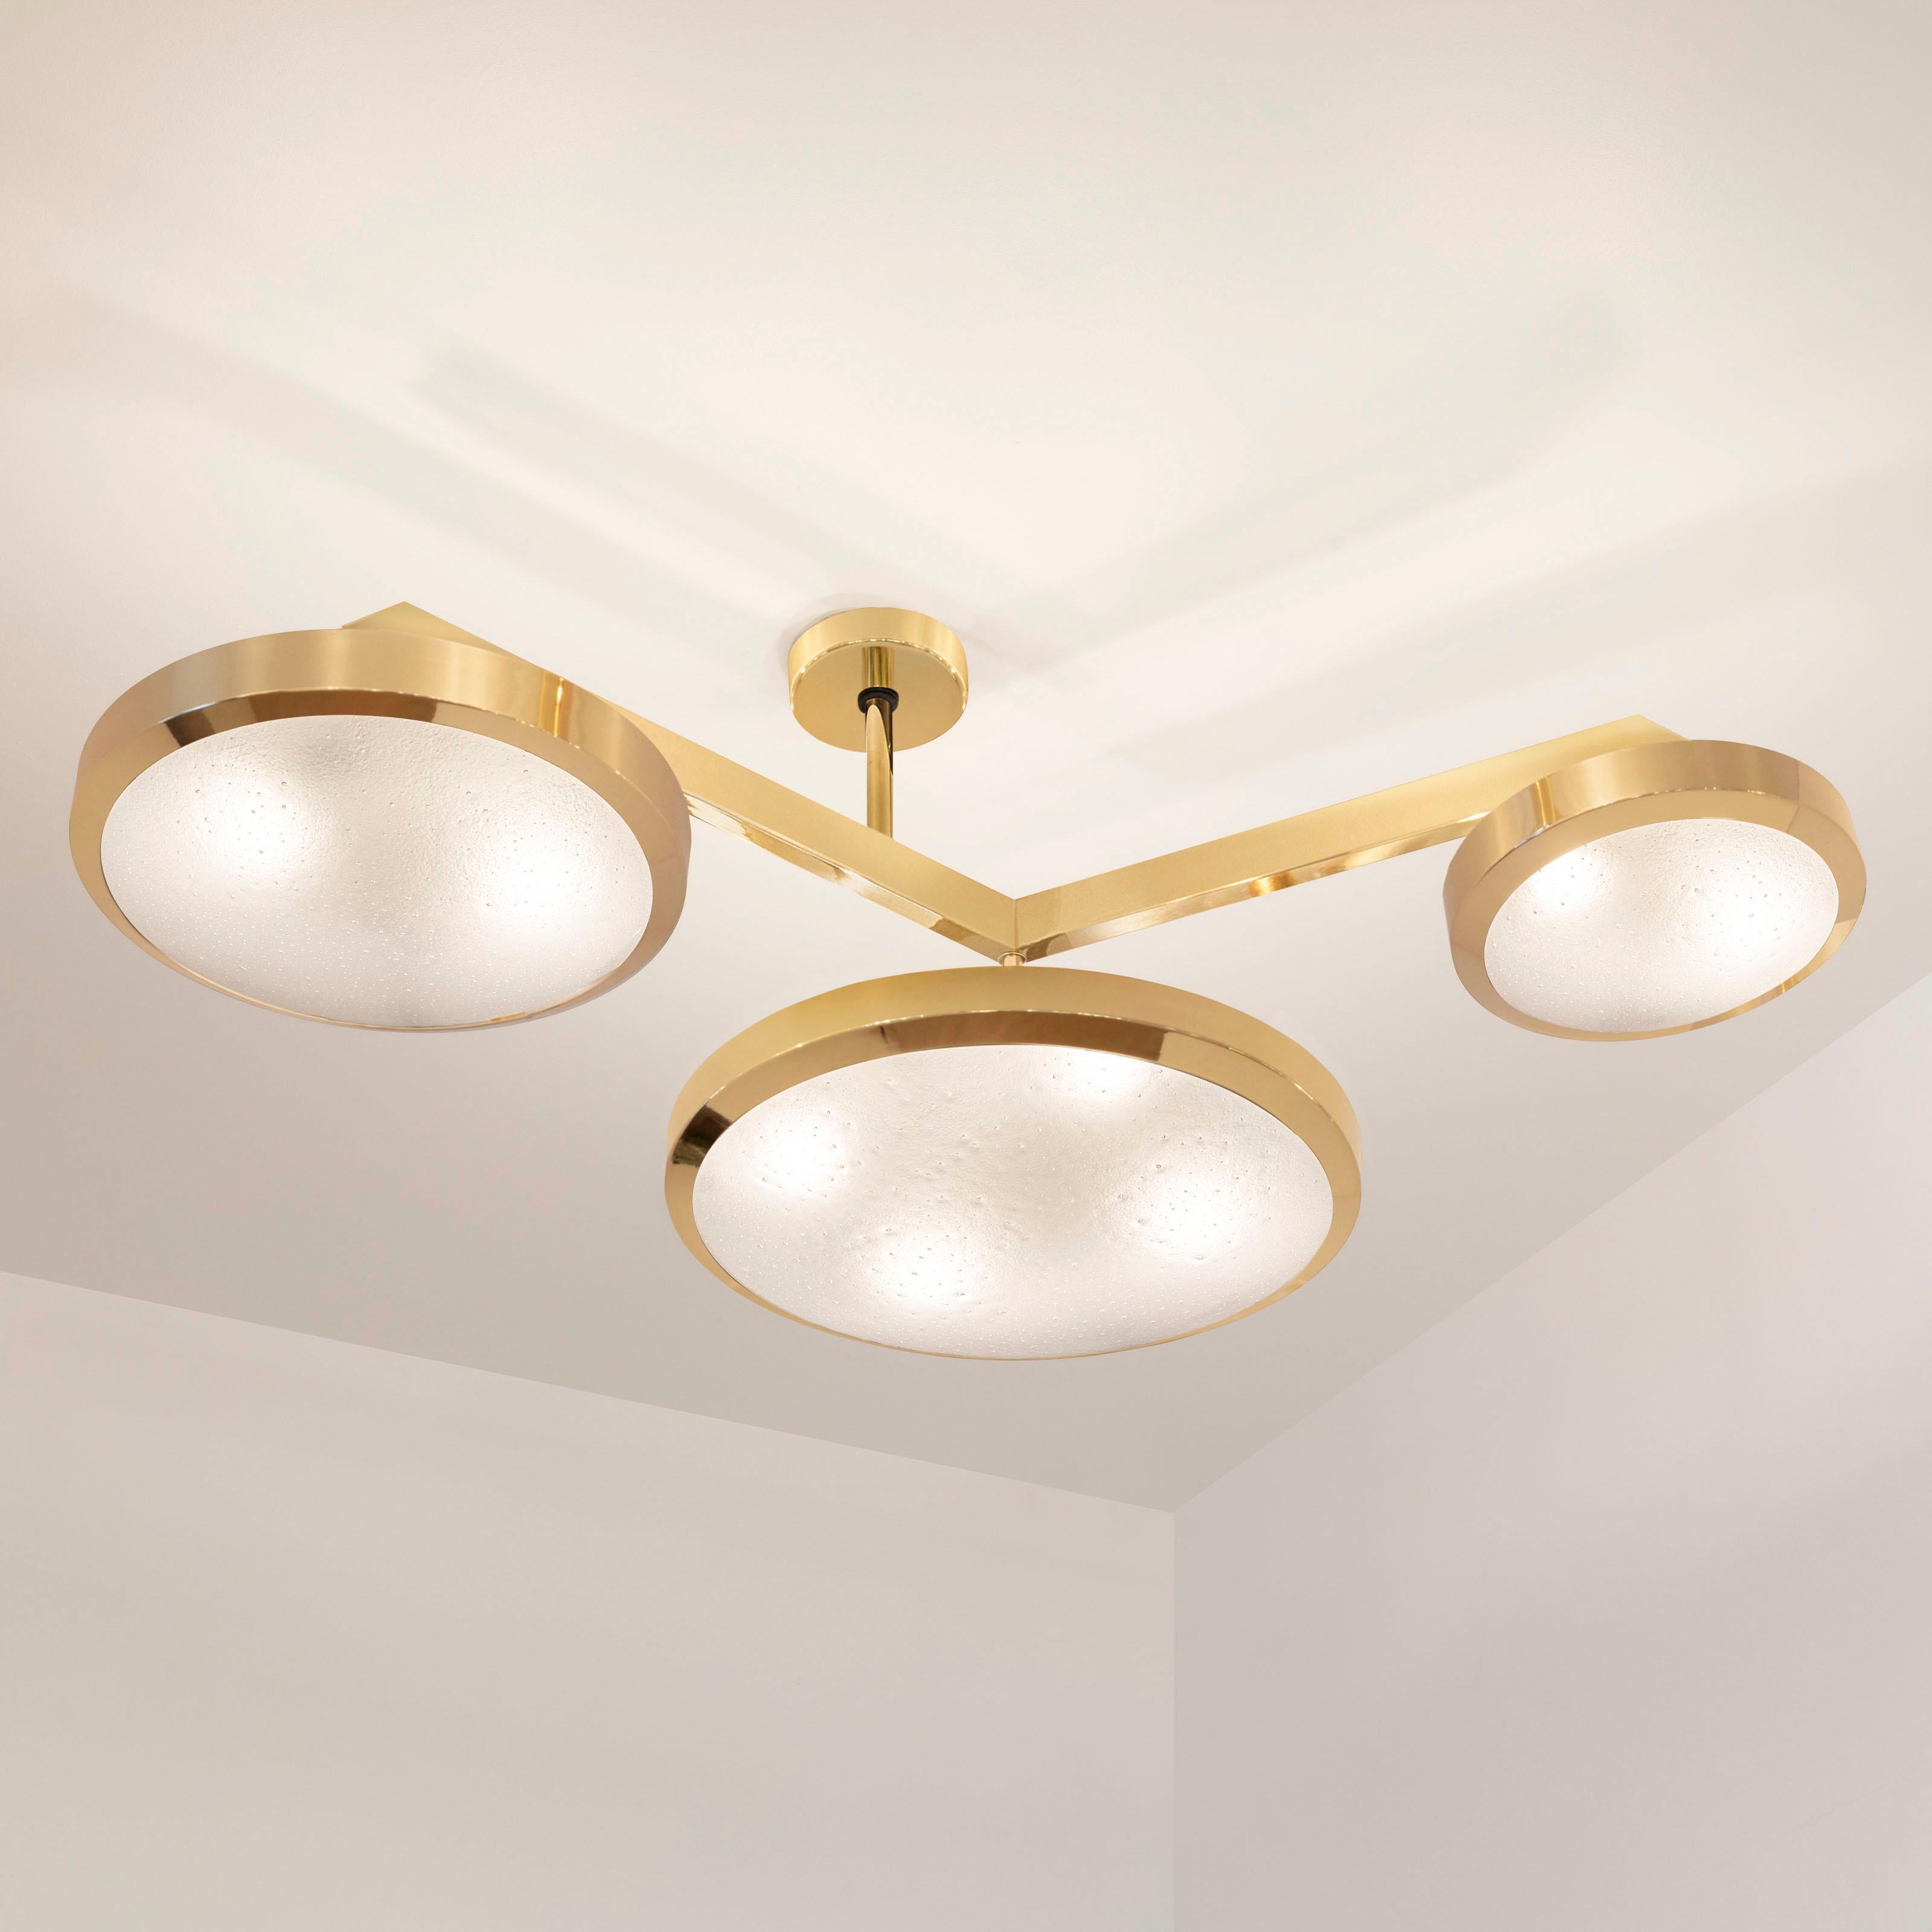 Zeta Ceiling Light by Gaspare Asaro-Polished Nickel Finish In New Condition For Sale In New York, NY